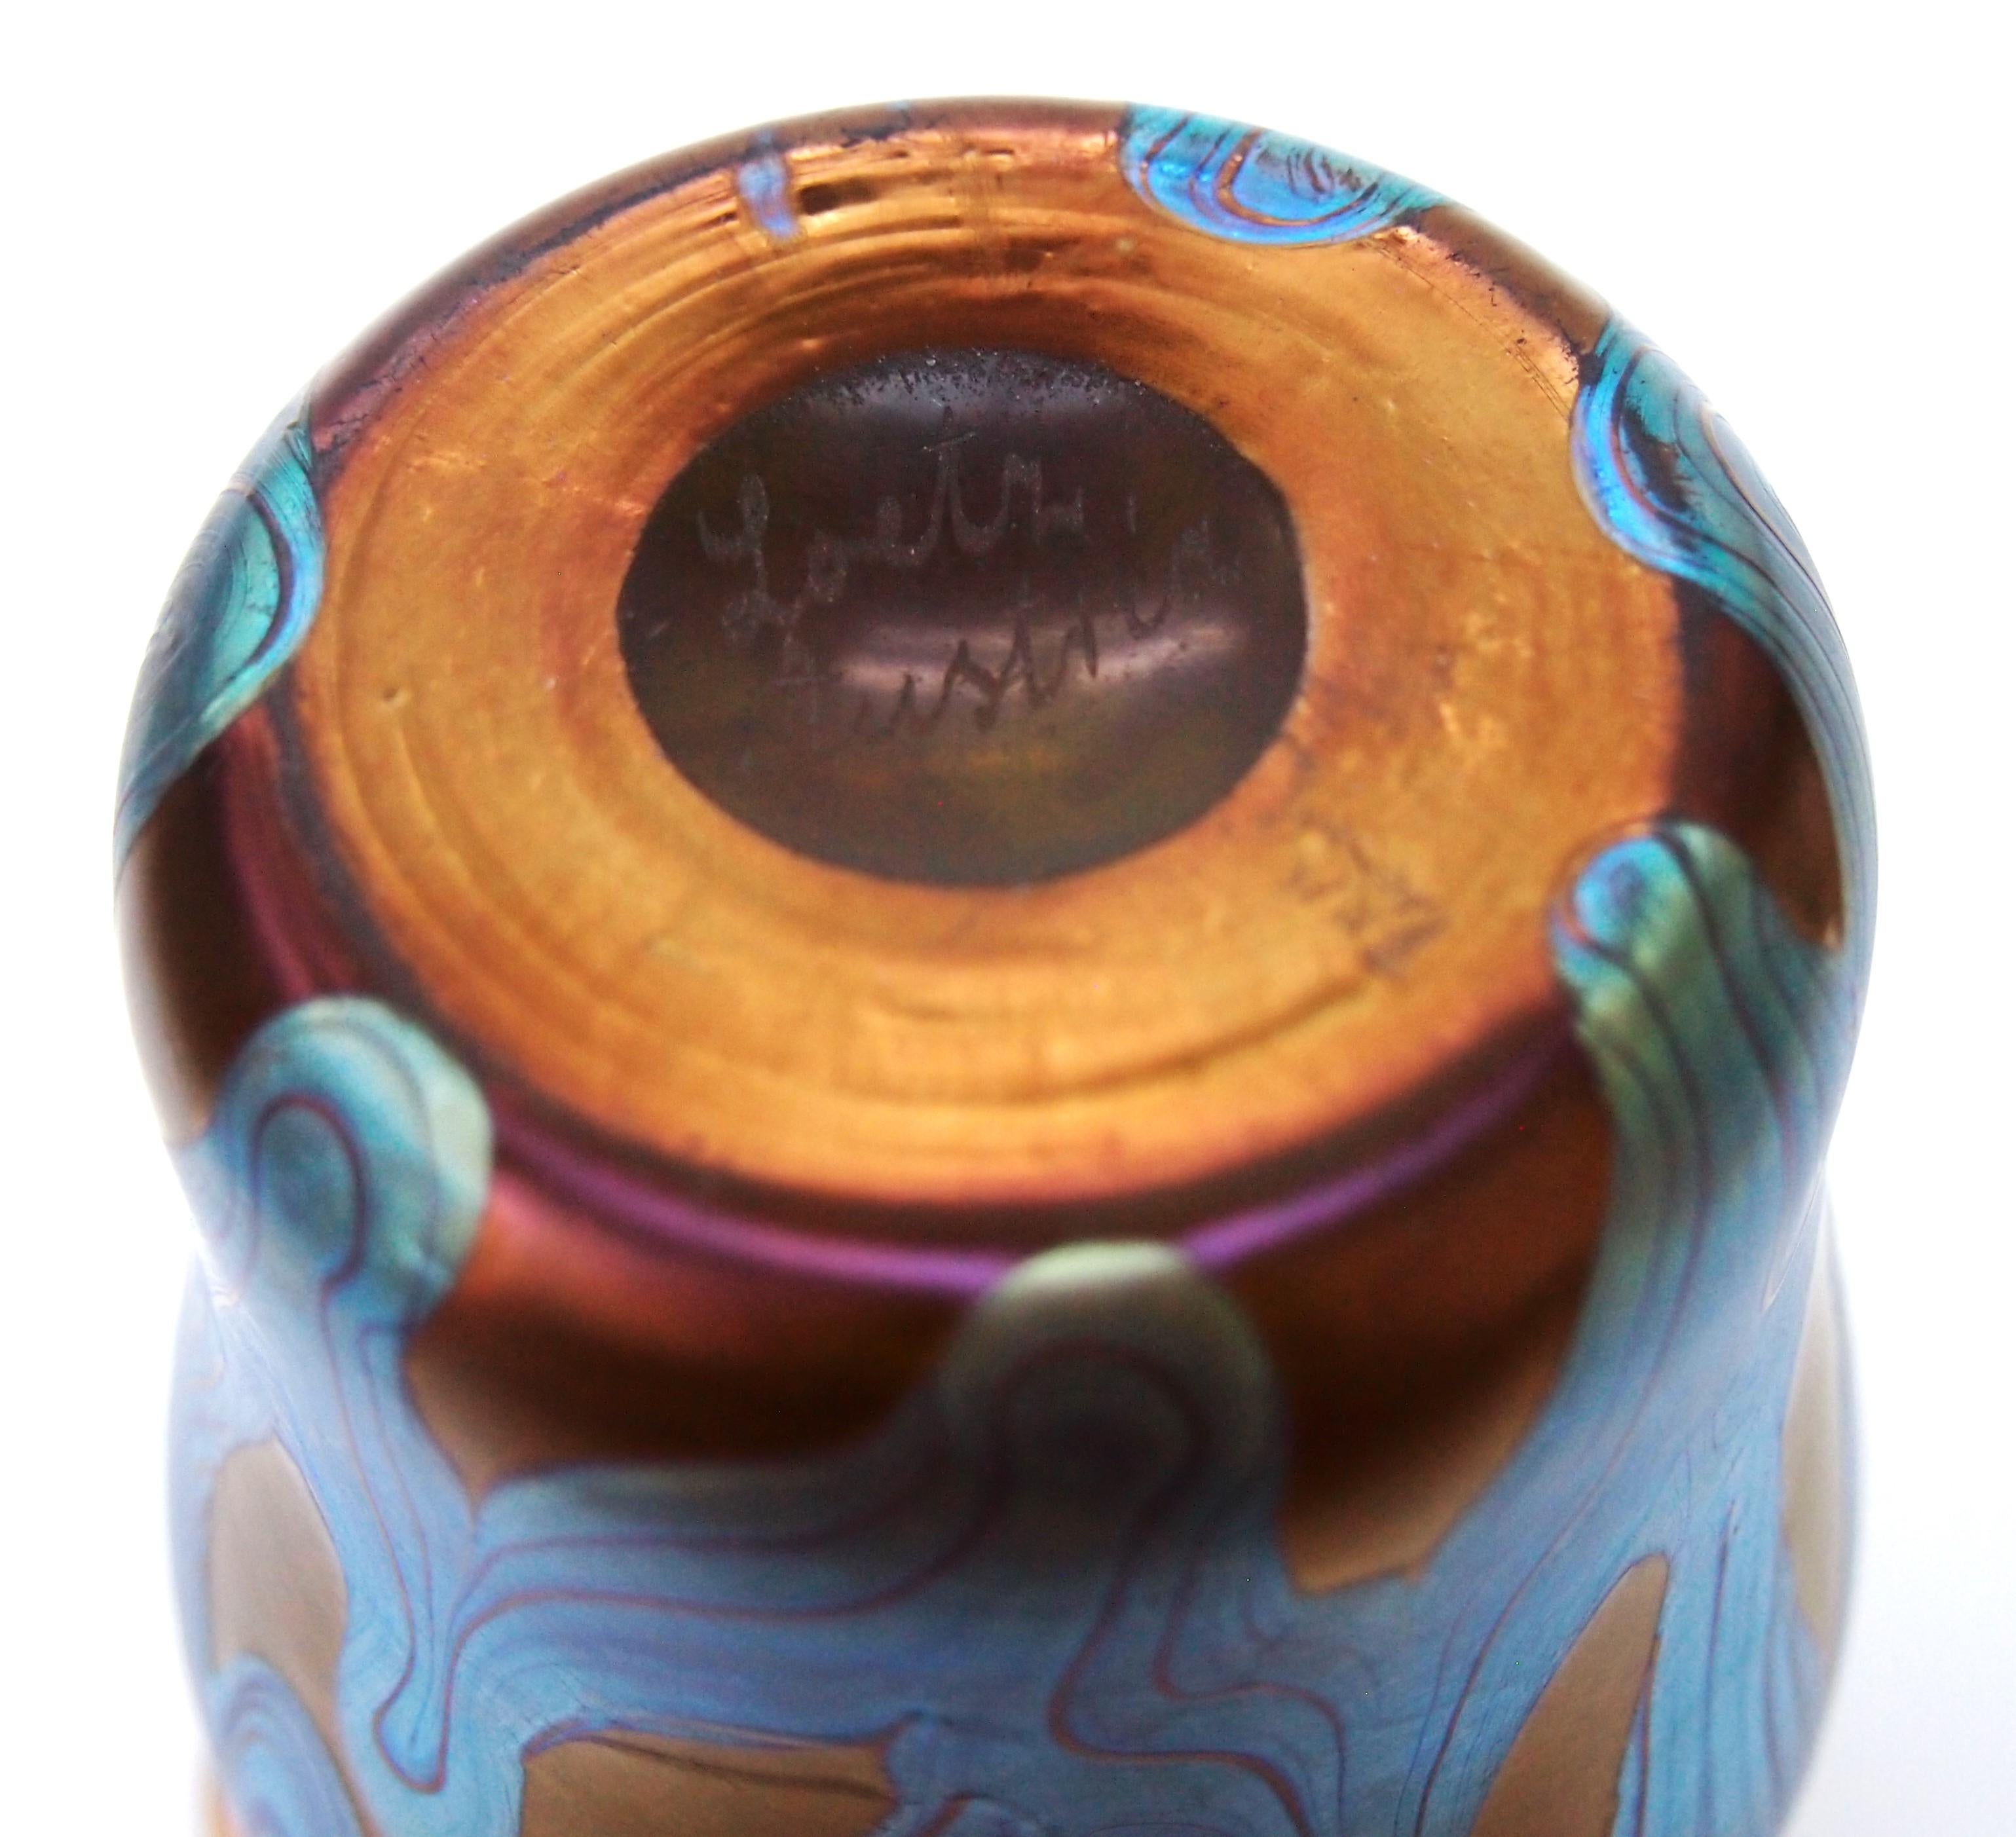 Early 20th Century Rare and Important Loetz Phaenomen Vase PG 29 1900 -signed For Sale